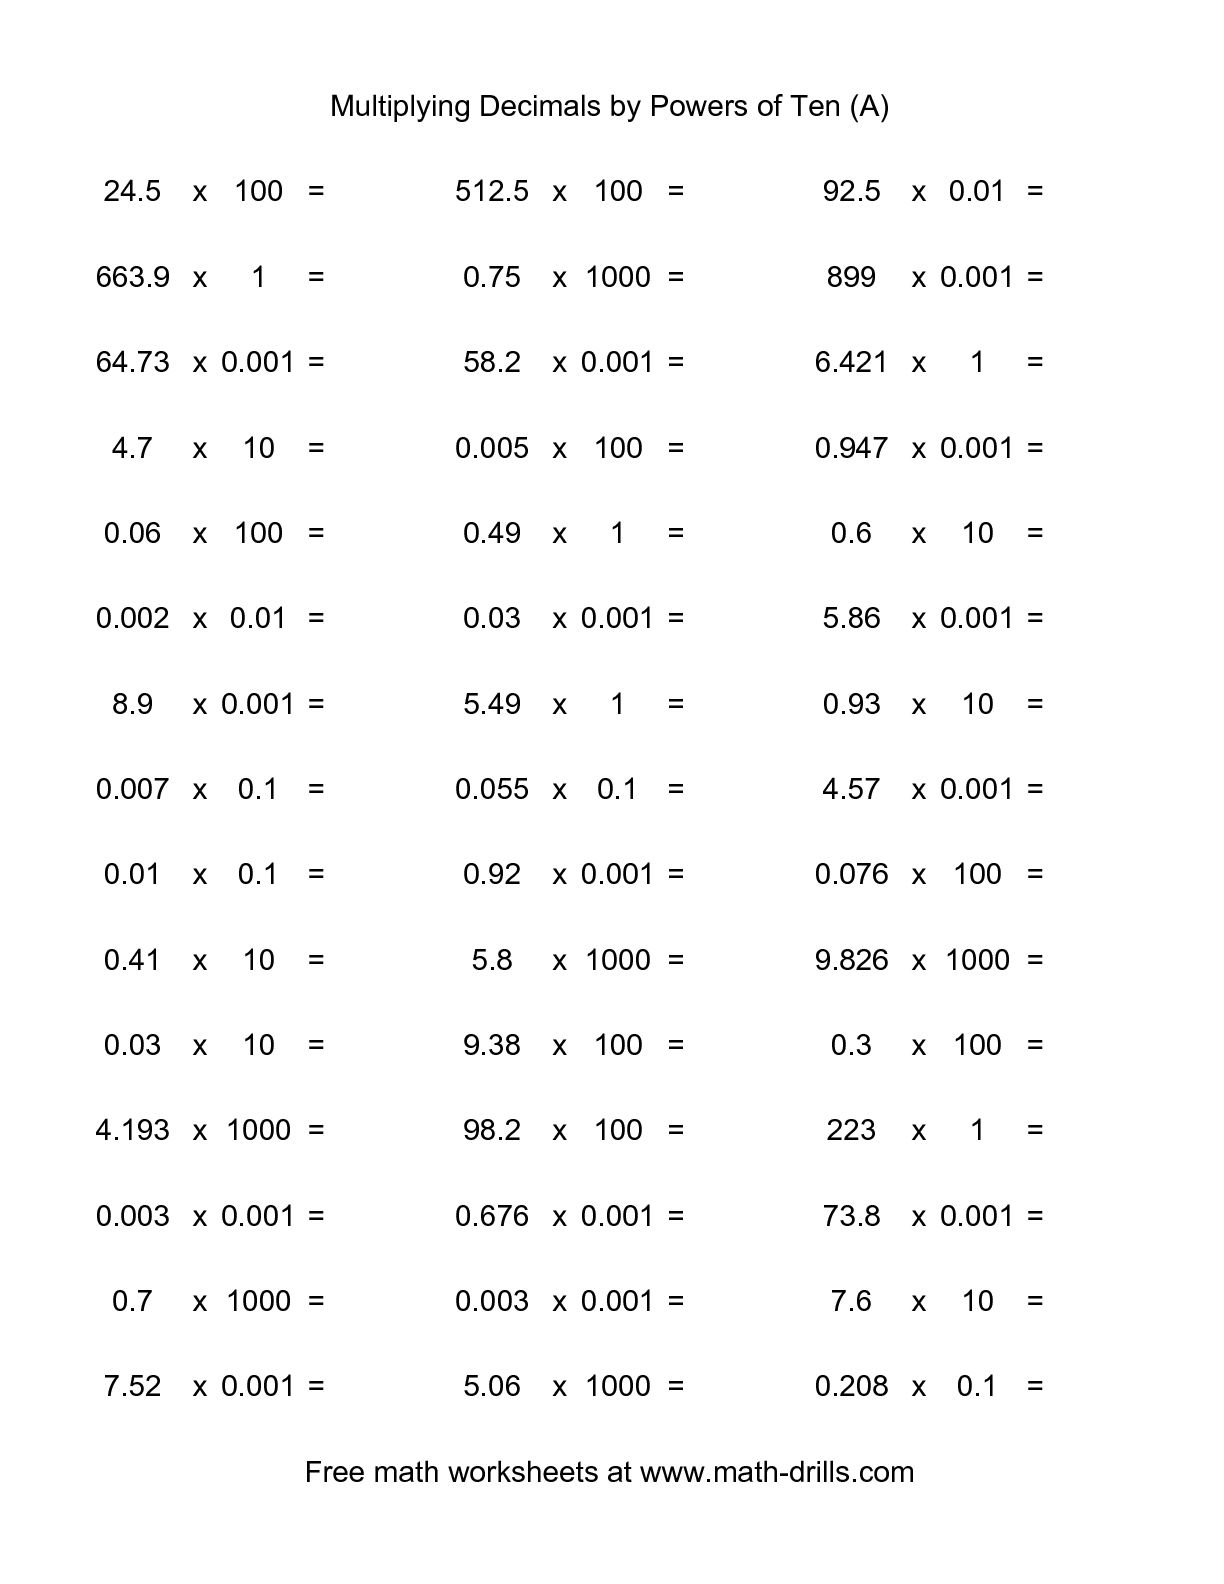 Powers of 10 Math Worksheets Image